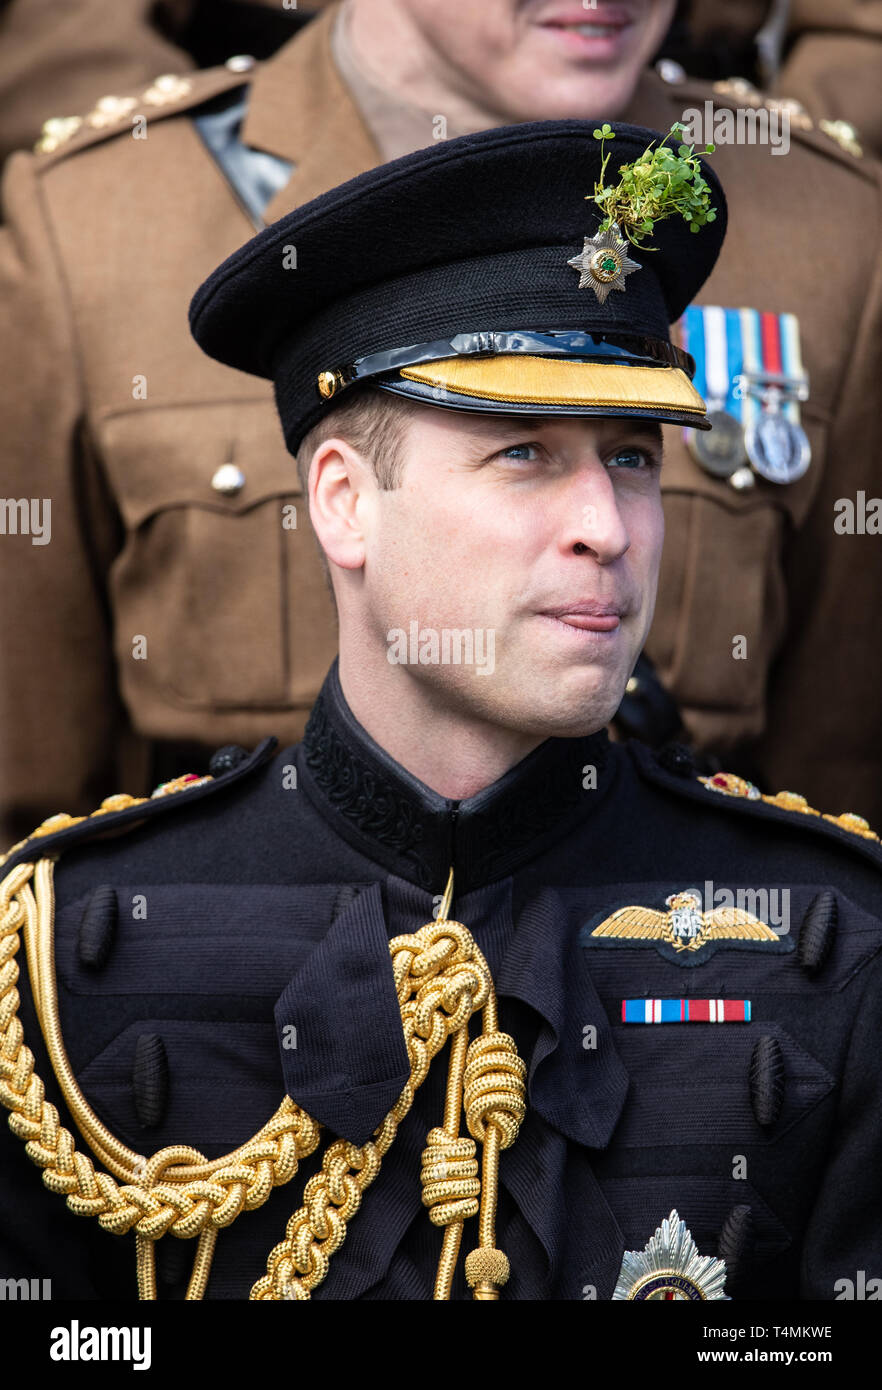 The Duke of Cambridge, Colonel of the Irish Guards, accompanied by The Duchess of Cambridge, visits the 1st Battalion Irish Guards at their St. Patrick's Day Parade at Cavalry Barracks, Hounslow.  Featuring: William Duke of Cambridge, Prince William Where: London, United Kingdom When: 17 Mar 2019 Credit: WENN.com Stock Photo